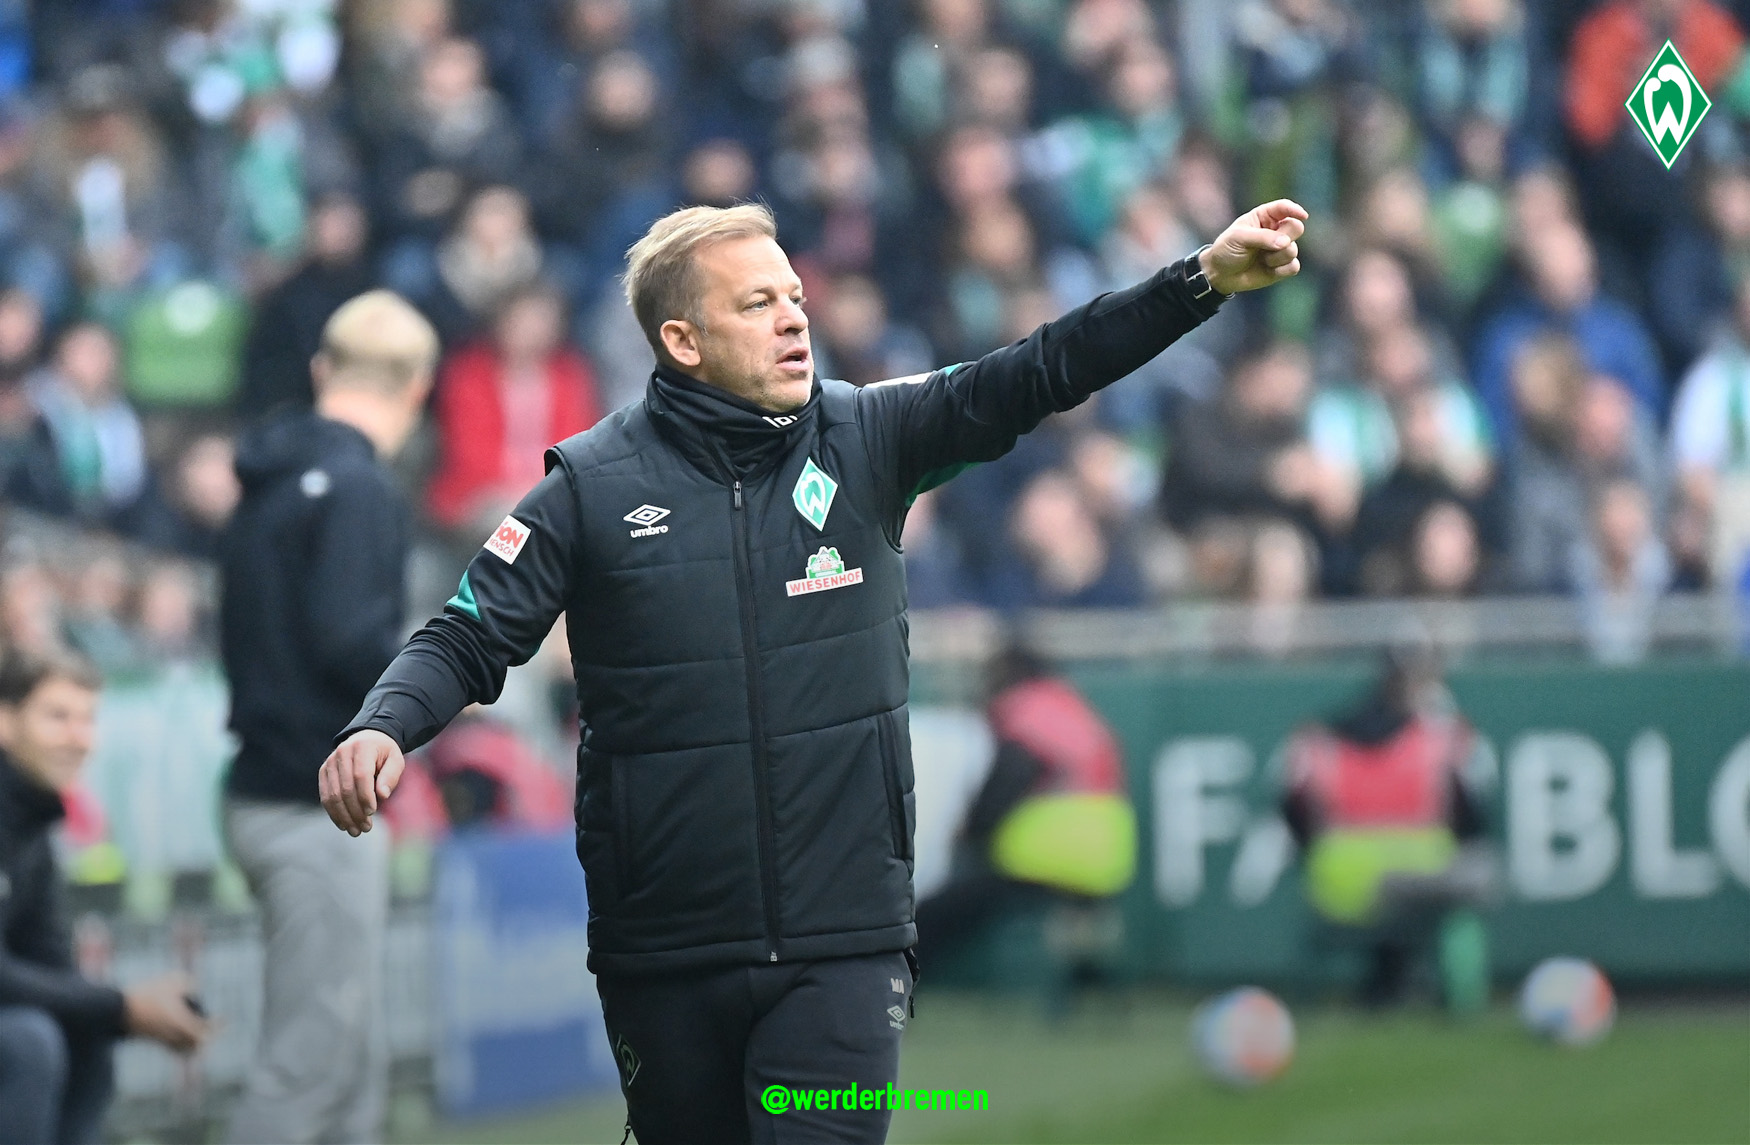 Werder Bremen head coach Markus Anfang resigns after fake COVID-19 vaccine allegations